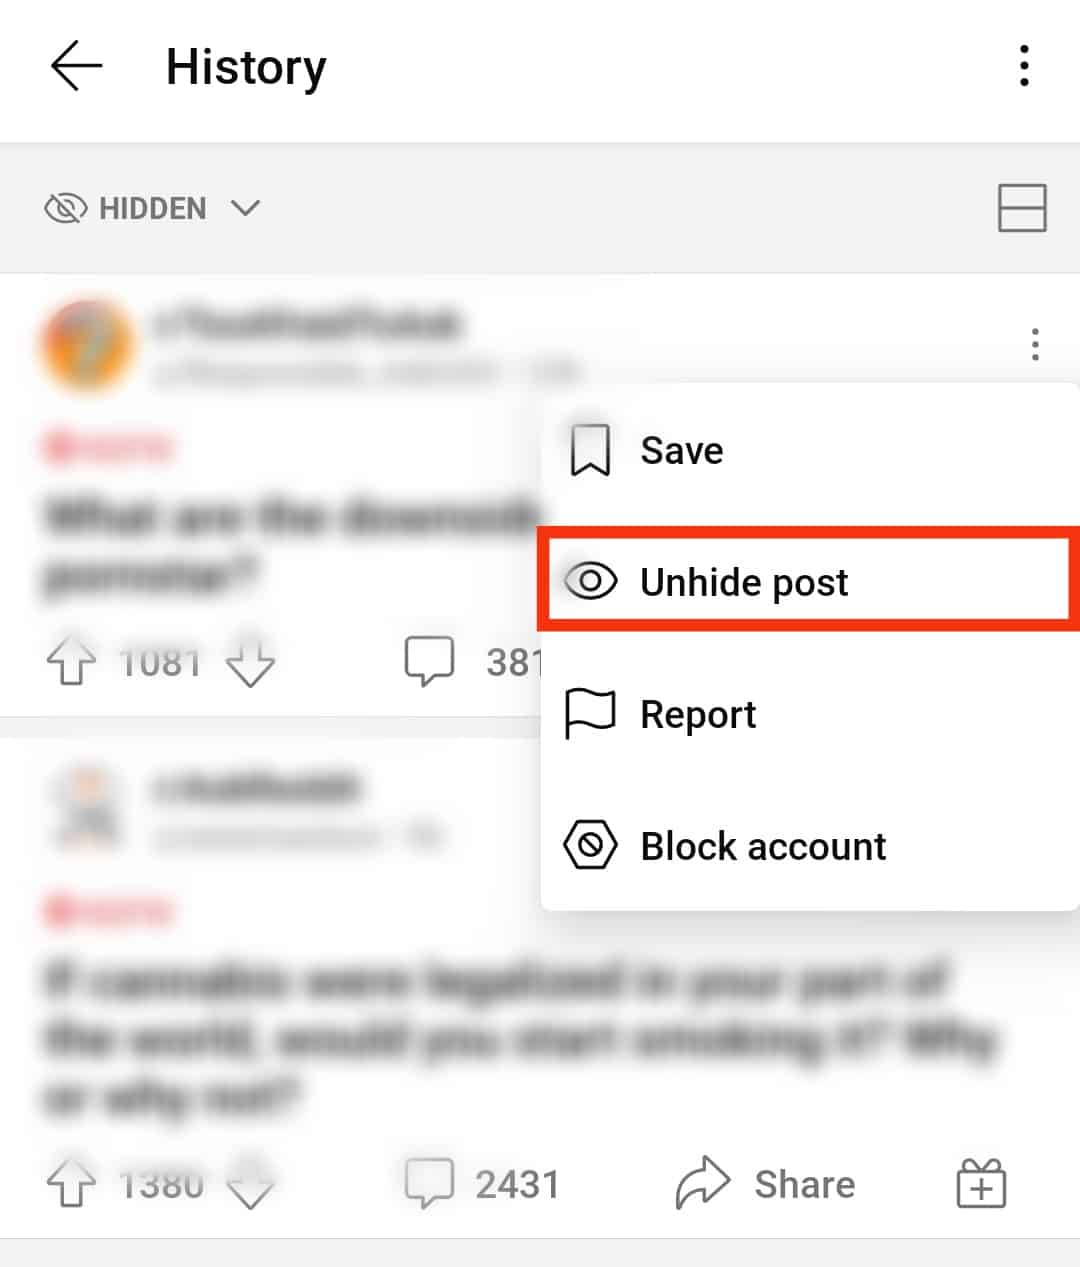 Click On The Unhide Post Option